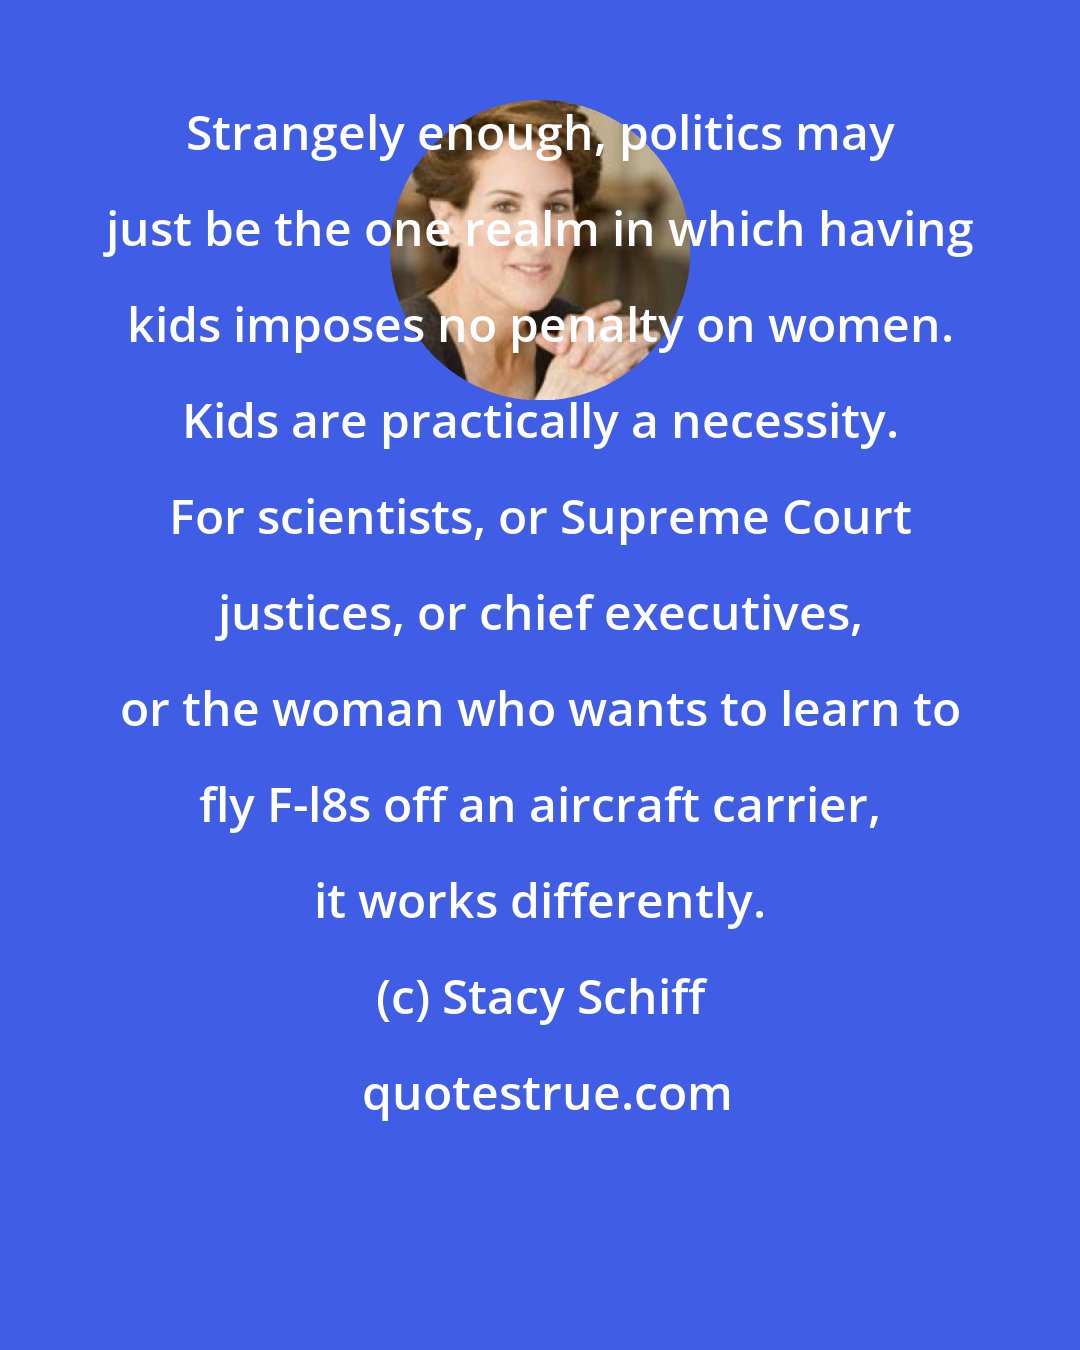 Stacy Schiff: Strangely enough, politics may just be the one realm in which having kids imposes no penalty on women. Kids are practically a necessity. For scientists, or Supreme Court justices, or chief executives, or the woman who wants to learn to fly F-l8s off an aircraft carrier, it works differently.